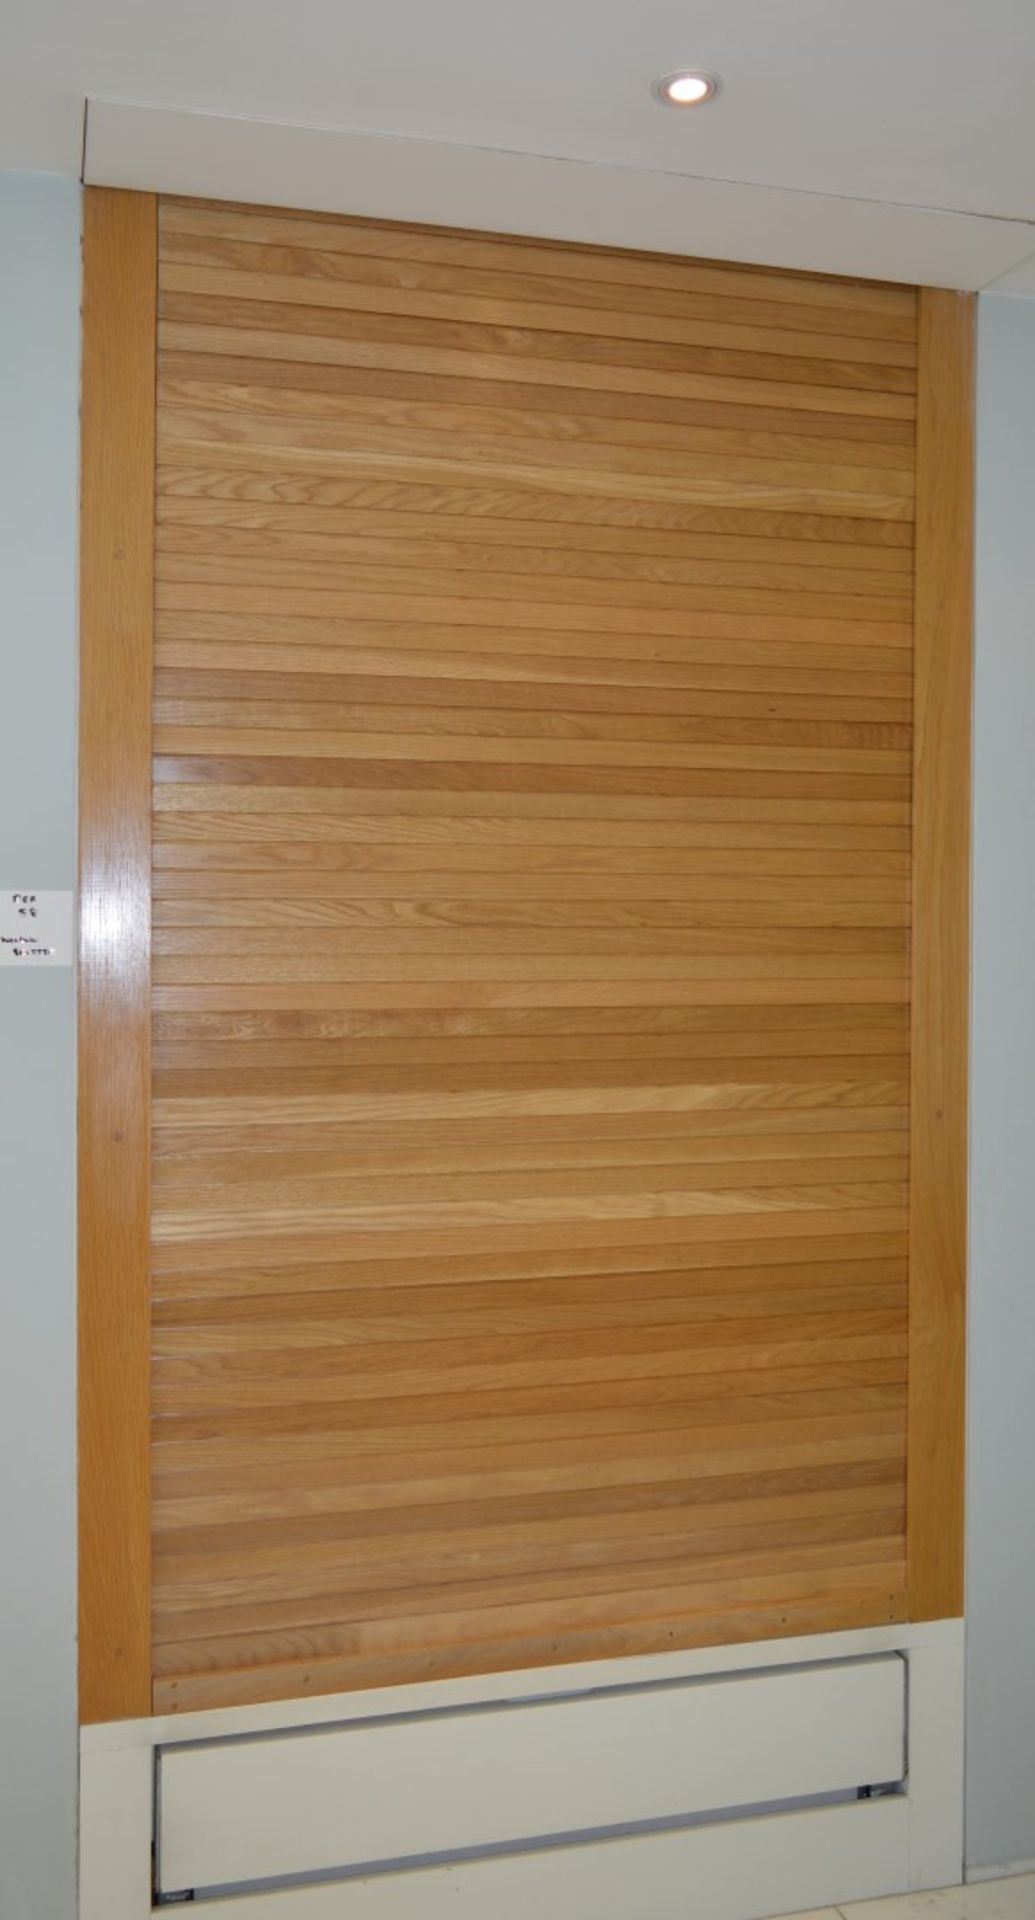 1 x Roller Shutter Window Shade With Electric Motor - Ref 58 - Solid Wooden Slat Design - CL230 - - Image 3 of 10